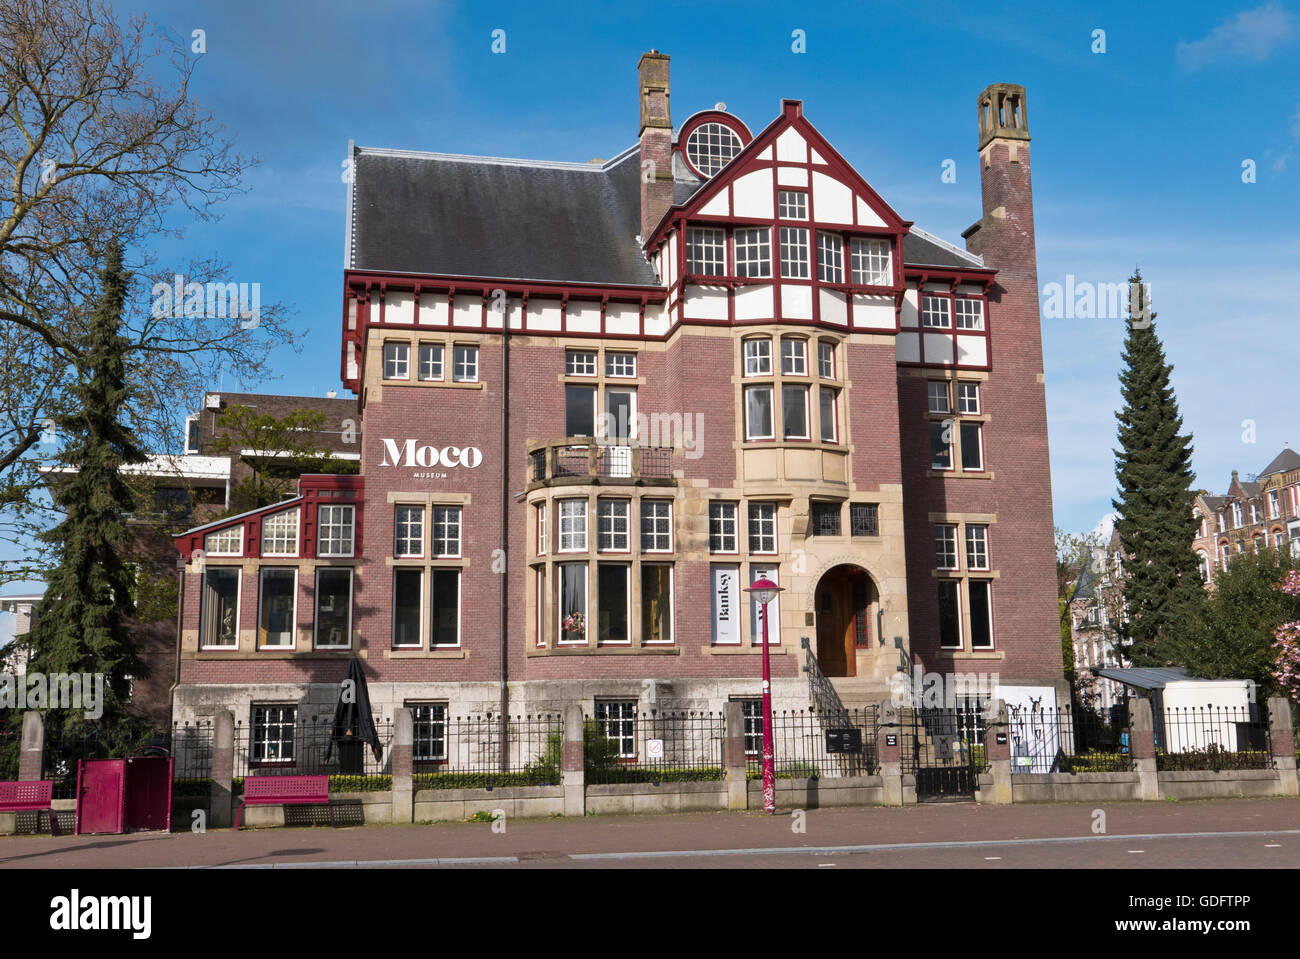 Moco Museum in Amsterdam, Holland, Netherlands Stock Photo - Alamy